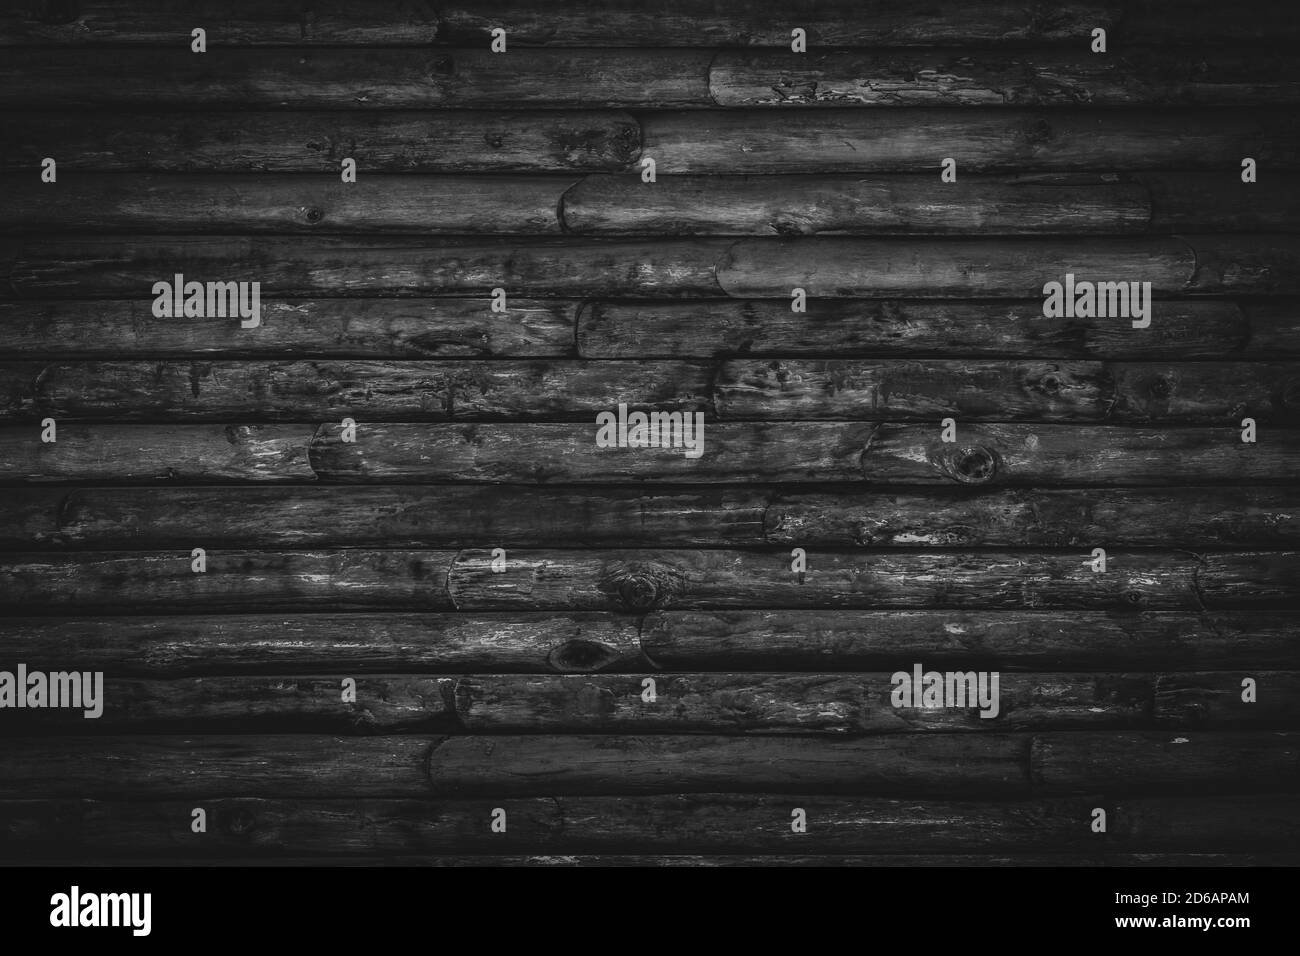 Dark wood plank wall texture background. Black wooden board old natural pattern. Reclaimed old grunge vintage wood wall Paneling texture. Stock Photo